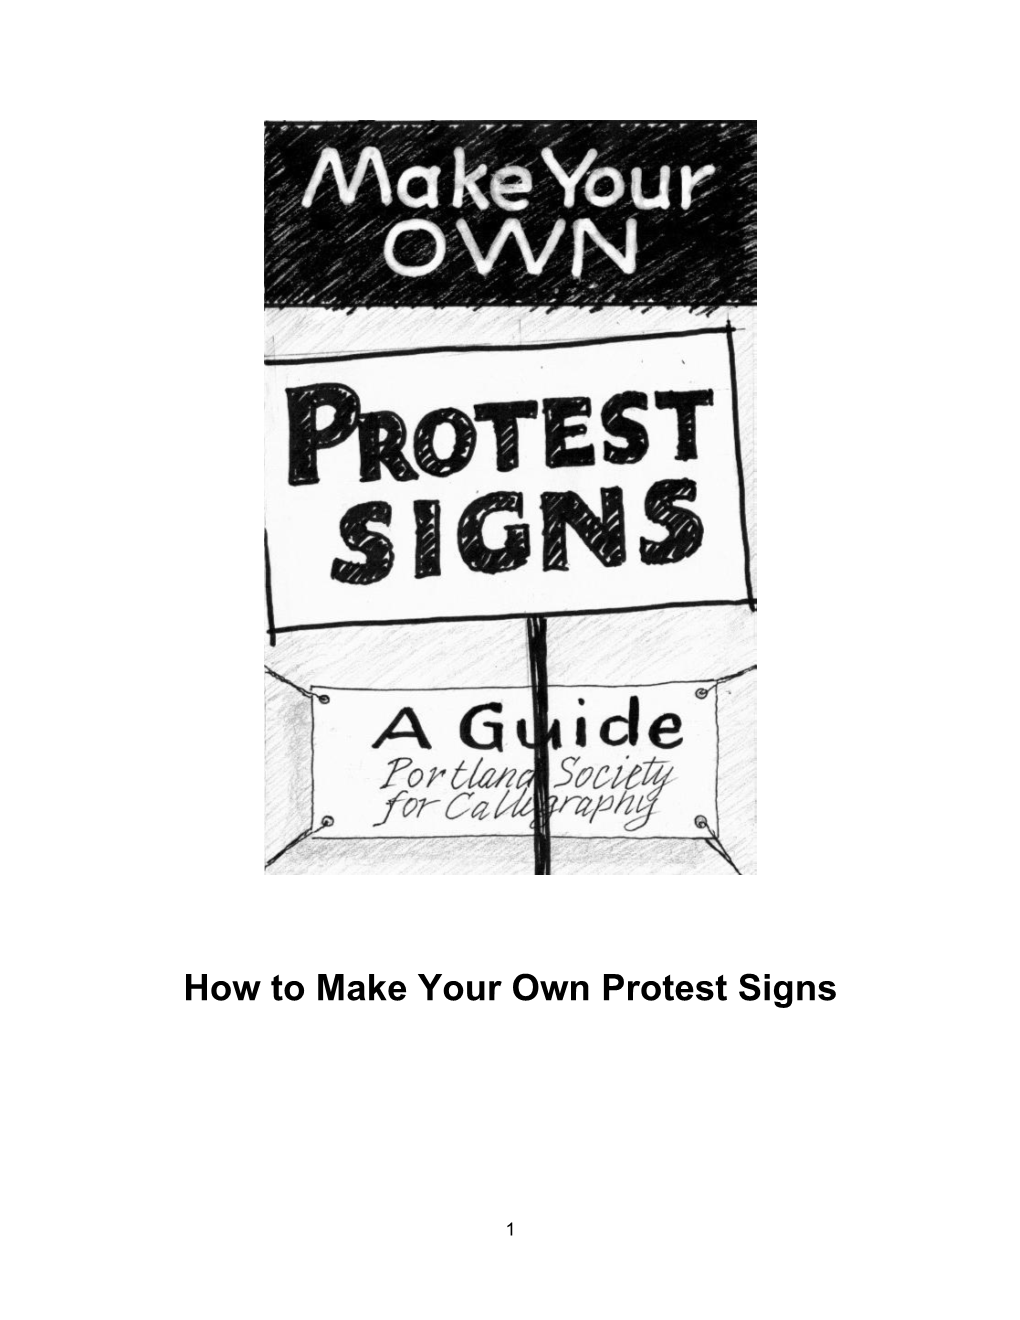 How to Make Your Own Protest Signs